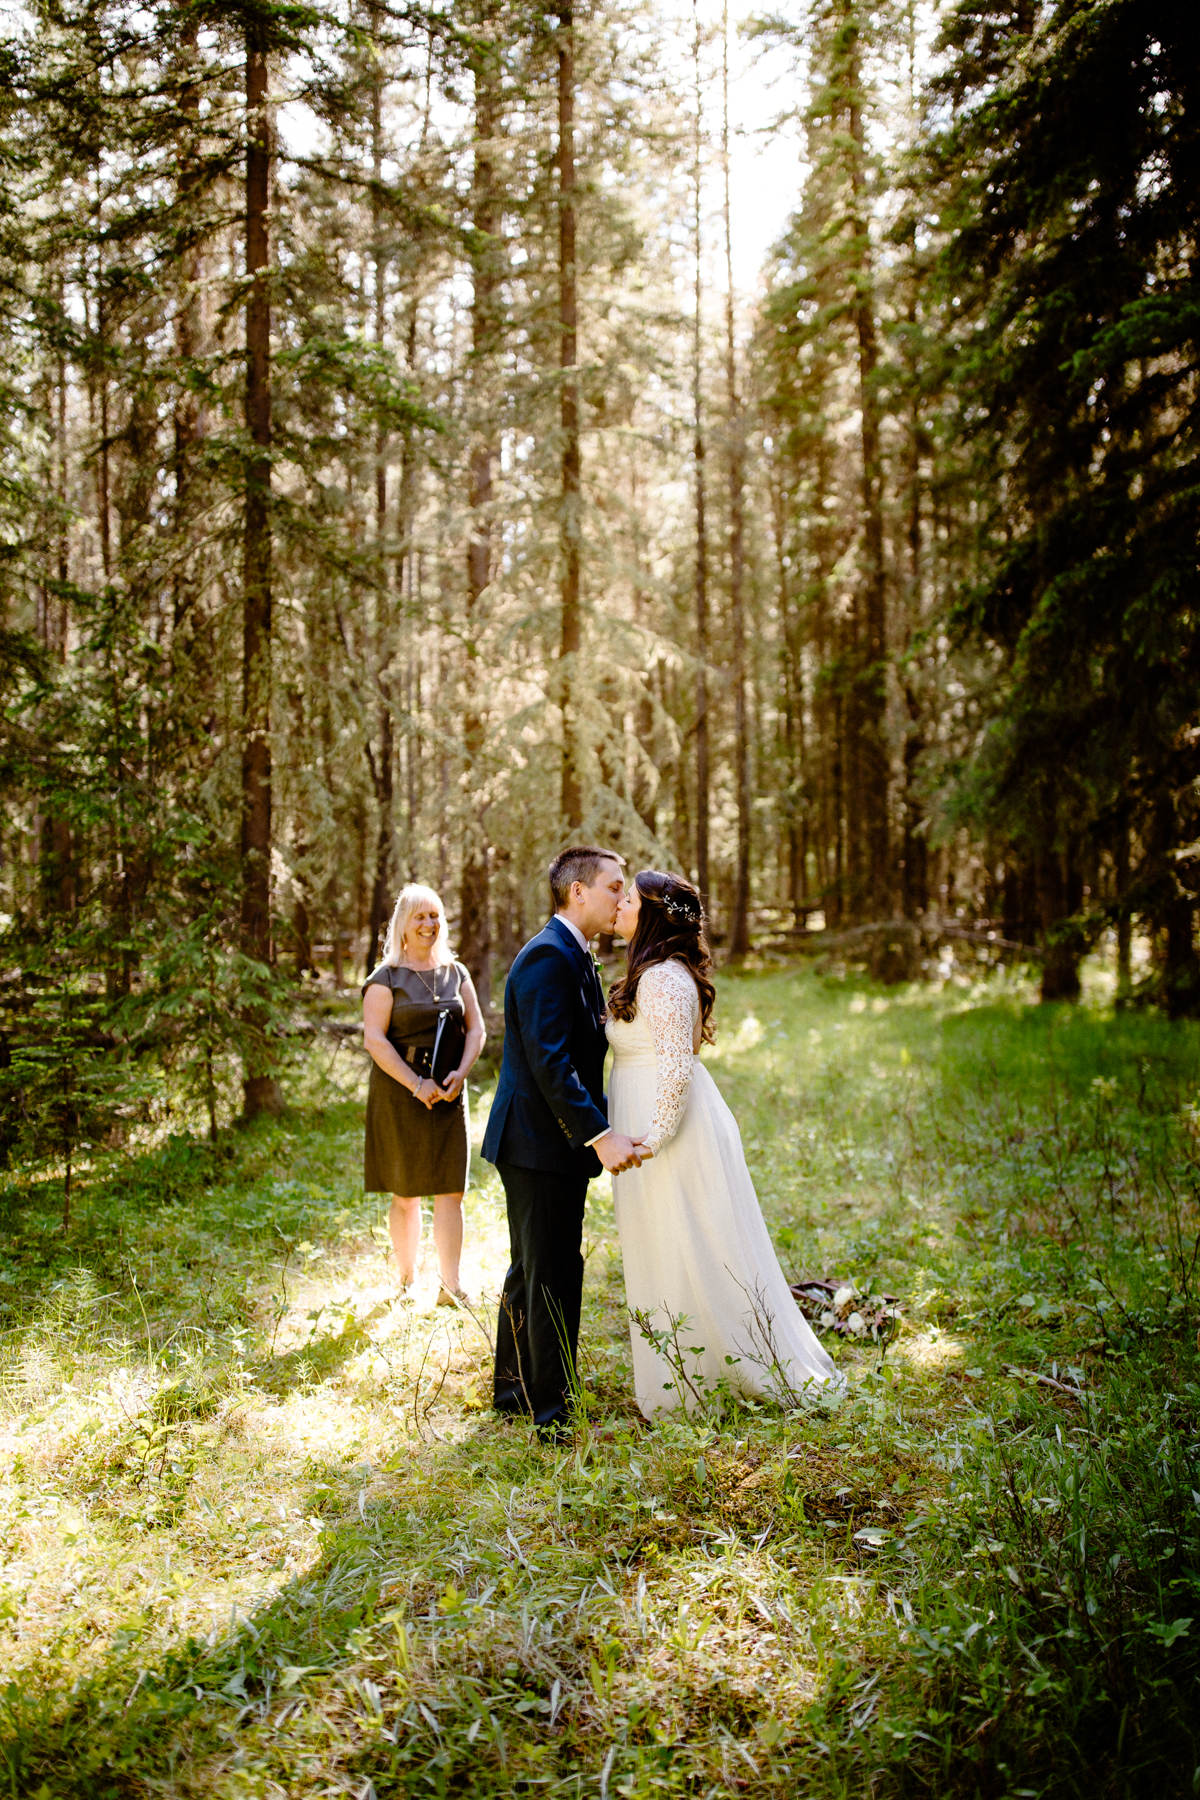 Vow Renewal Photography in Banff - Image 12